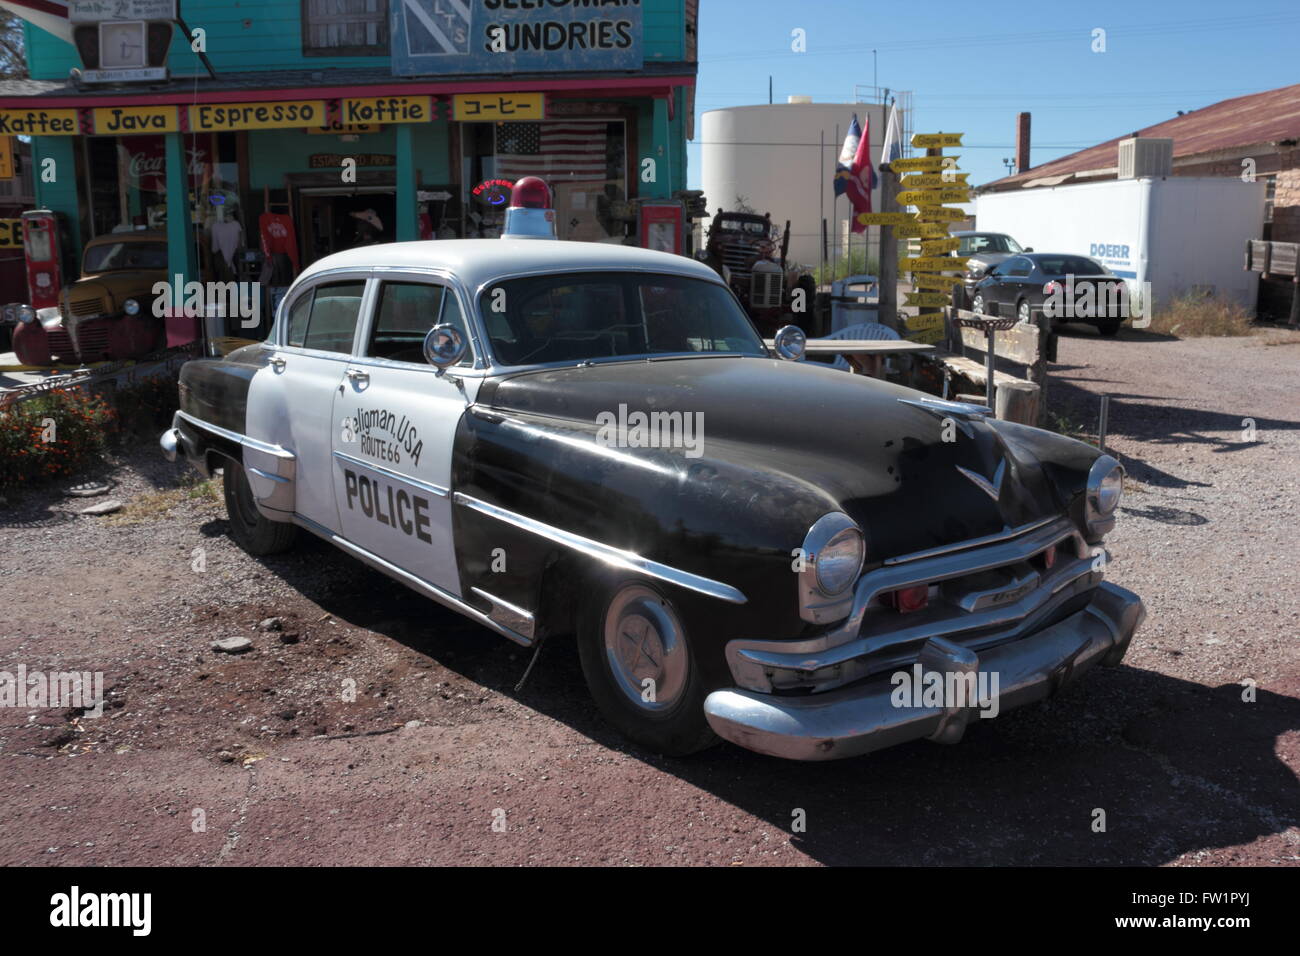 Police car outside the Seligman Sundries Building, Route 66, now bypassed by Interstate 40, Seligman, Arizona, USA. Stock Photo